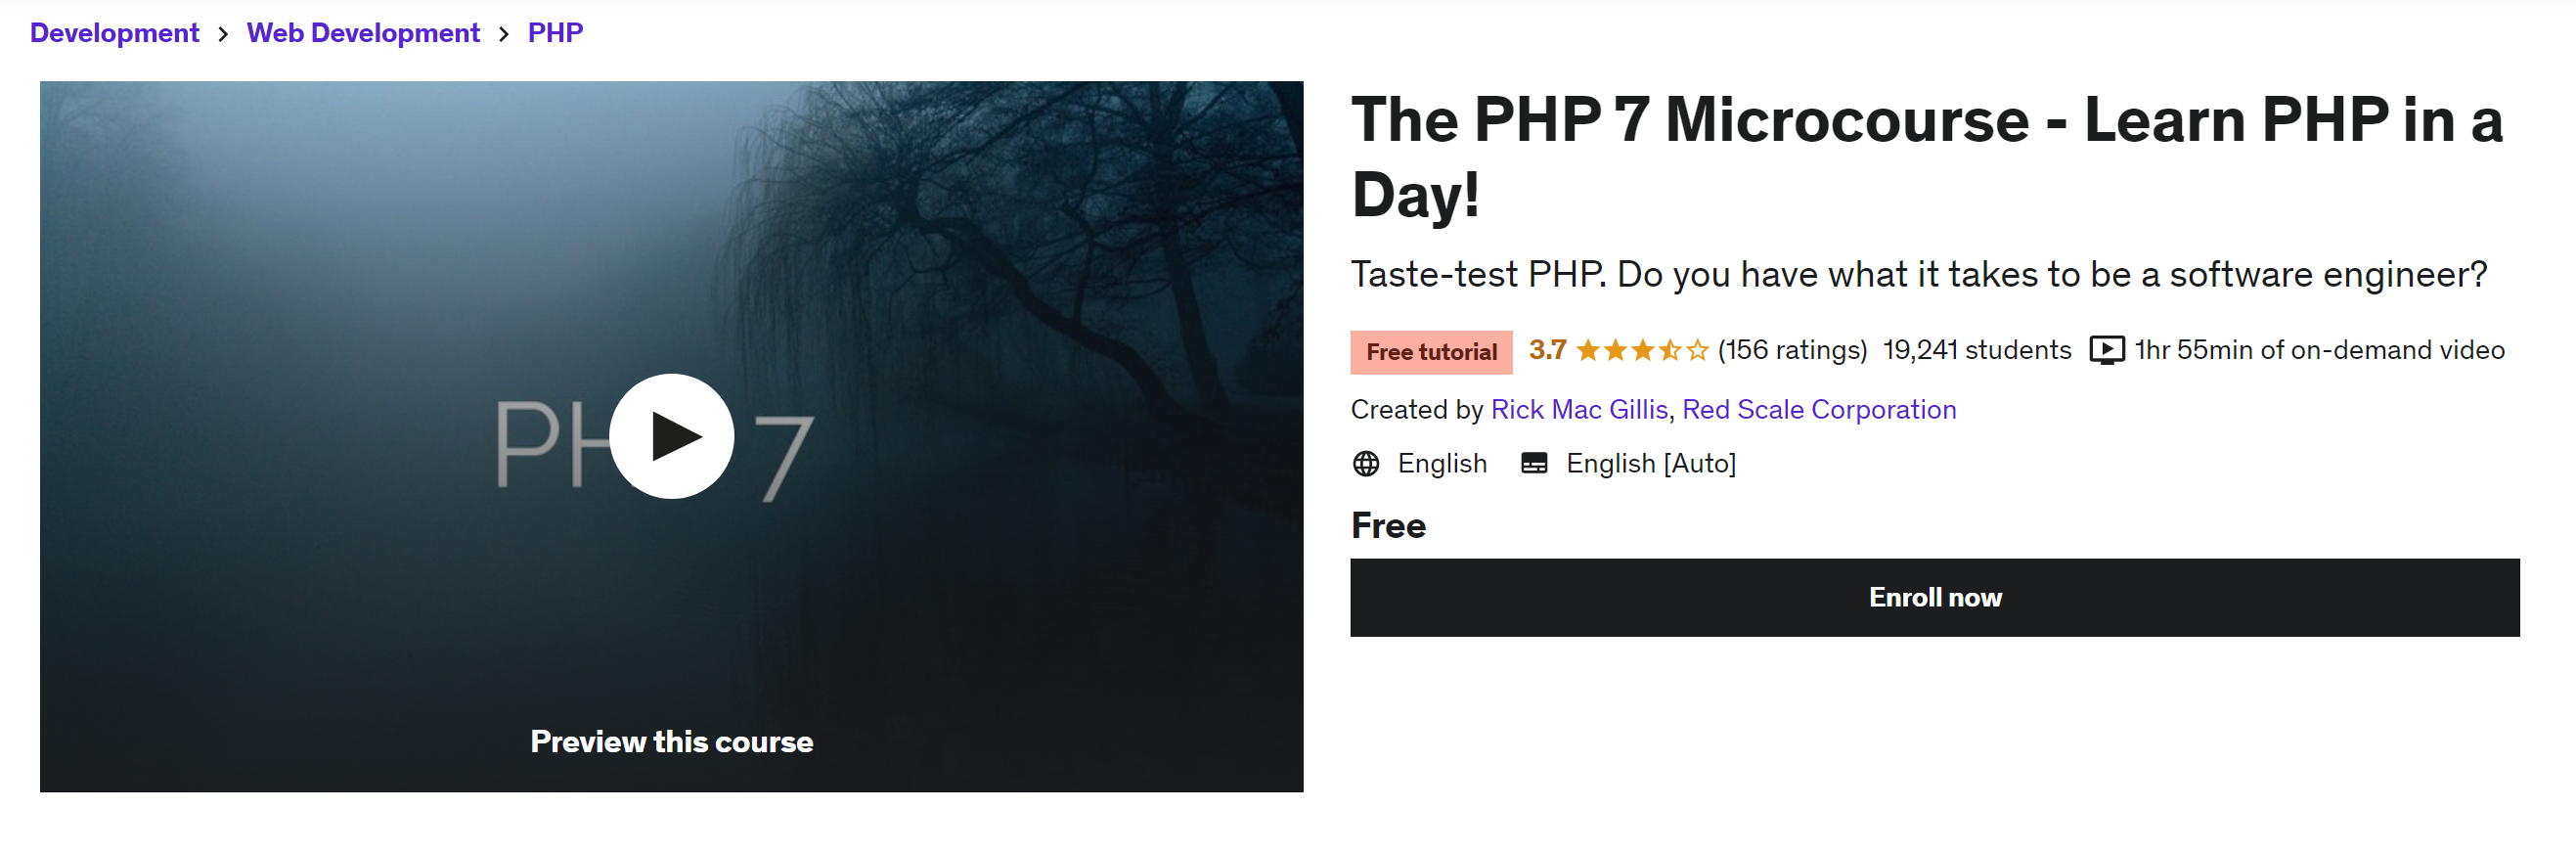 The PHP 7 Micro course - Learn PHP in a Day